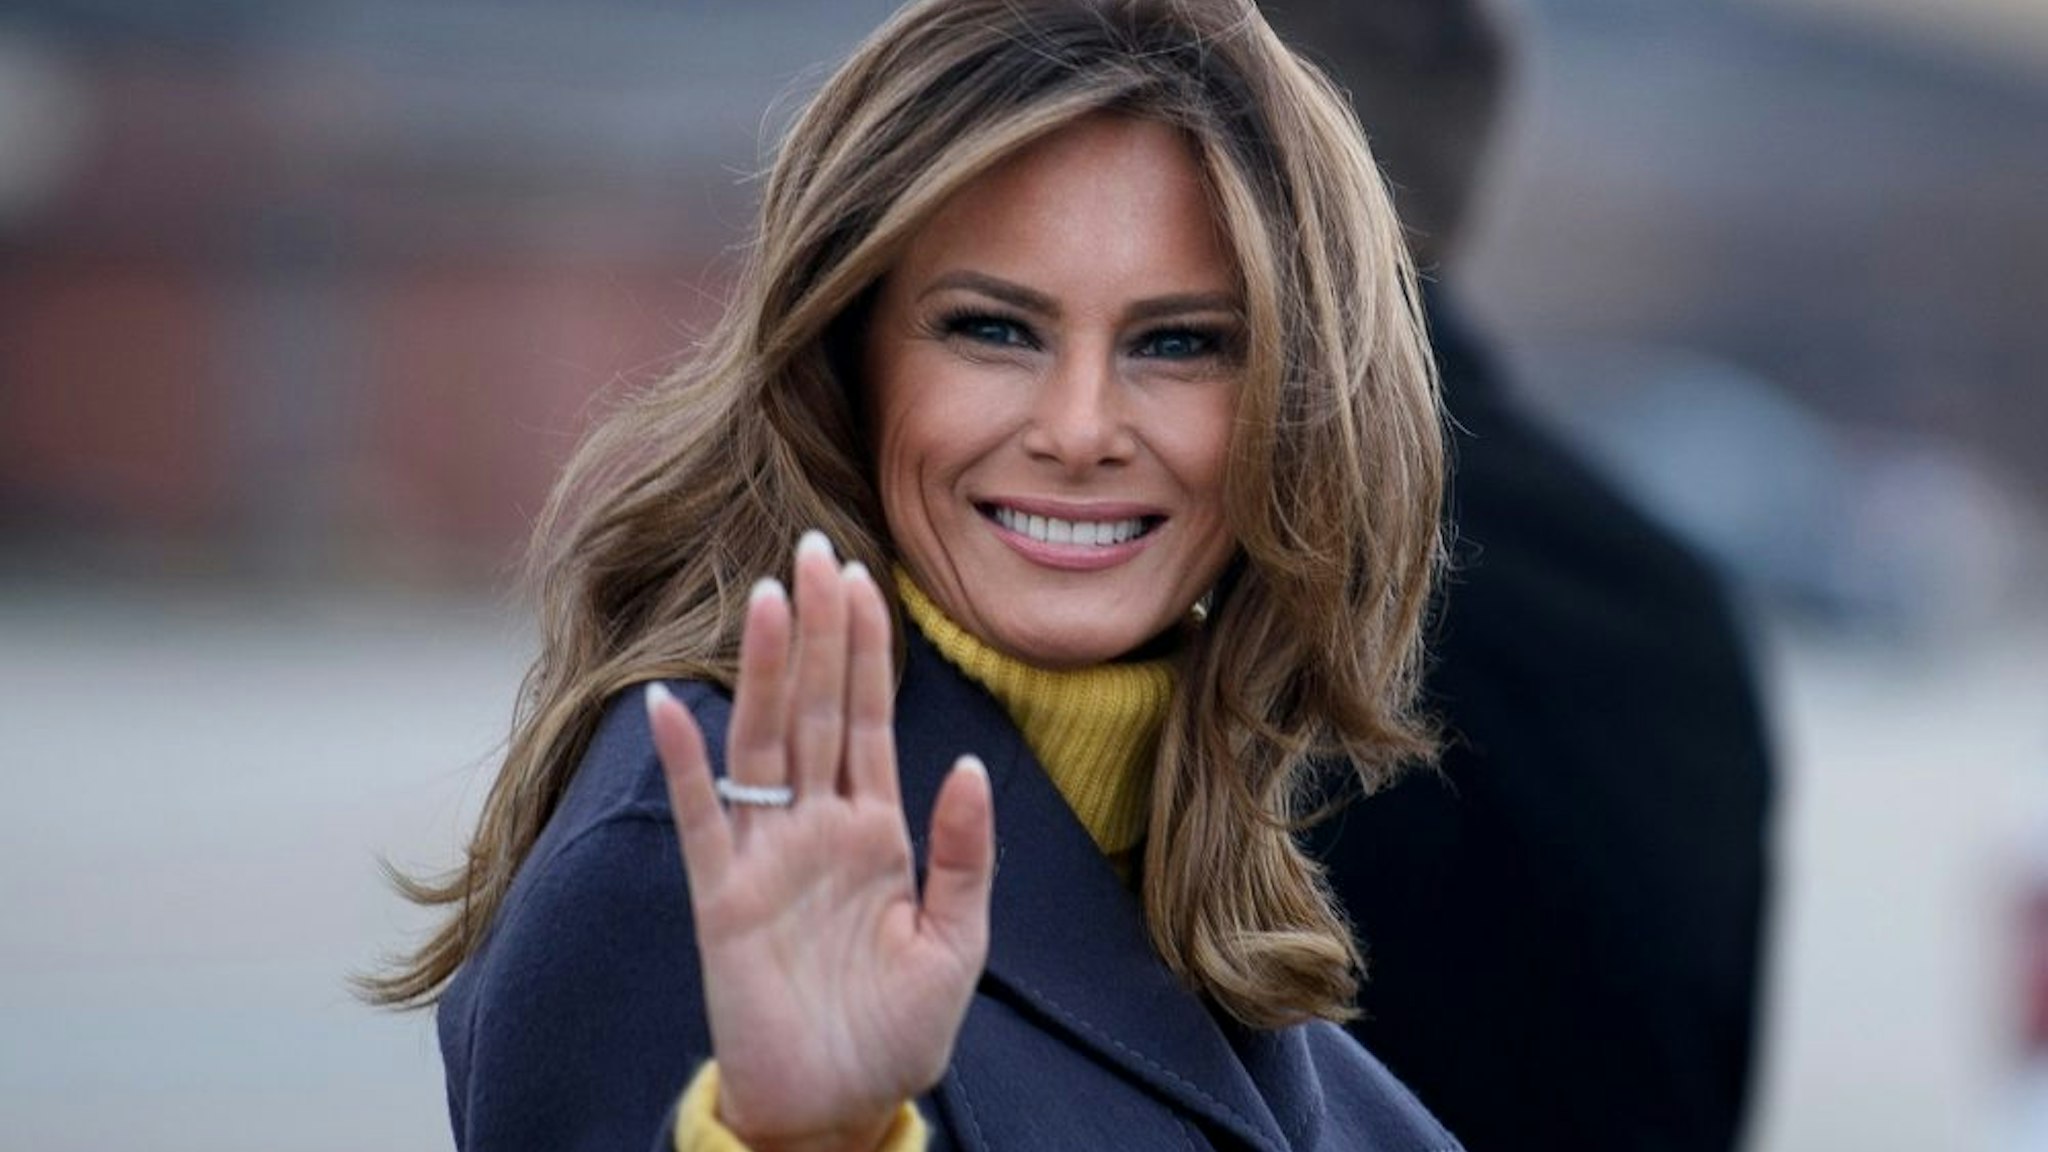 TOPSHOT - US First Lady Melania Trump boards a plane at Andrews Air Force Base for a three state overnight trip March 4, 2019 in Maryland. - The First Lady travels to Oklahoma, Washington, and Nevada as part of her "Be Best" tour.